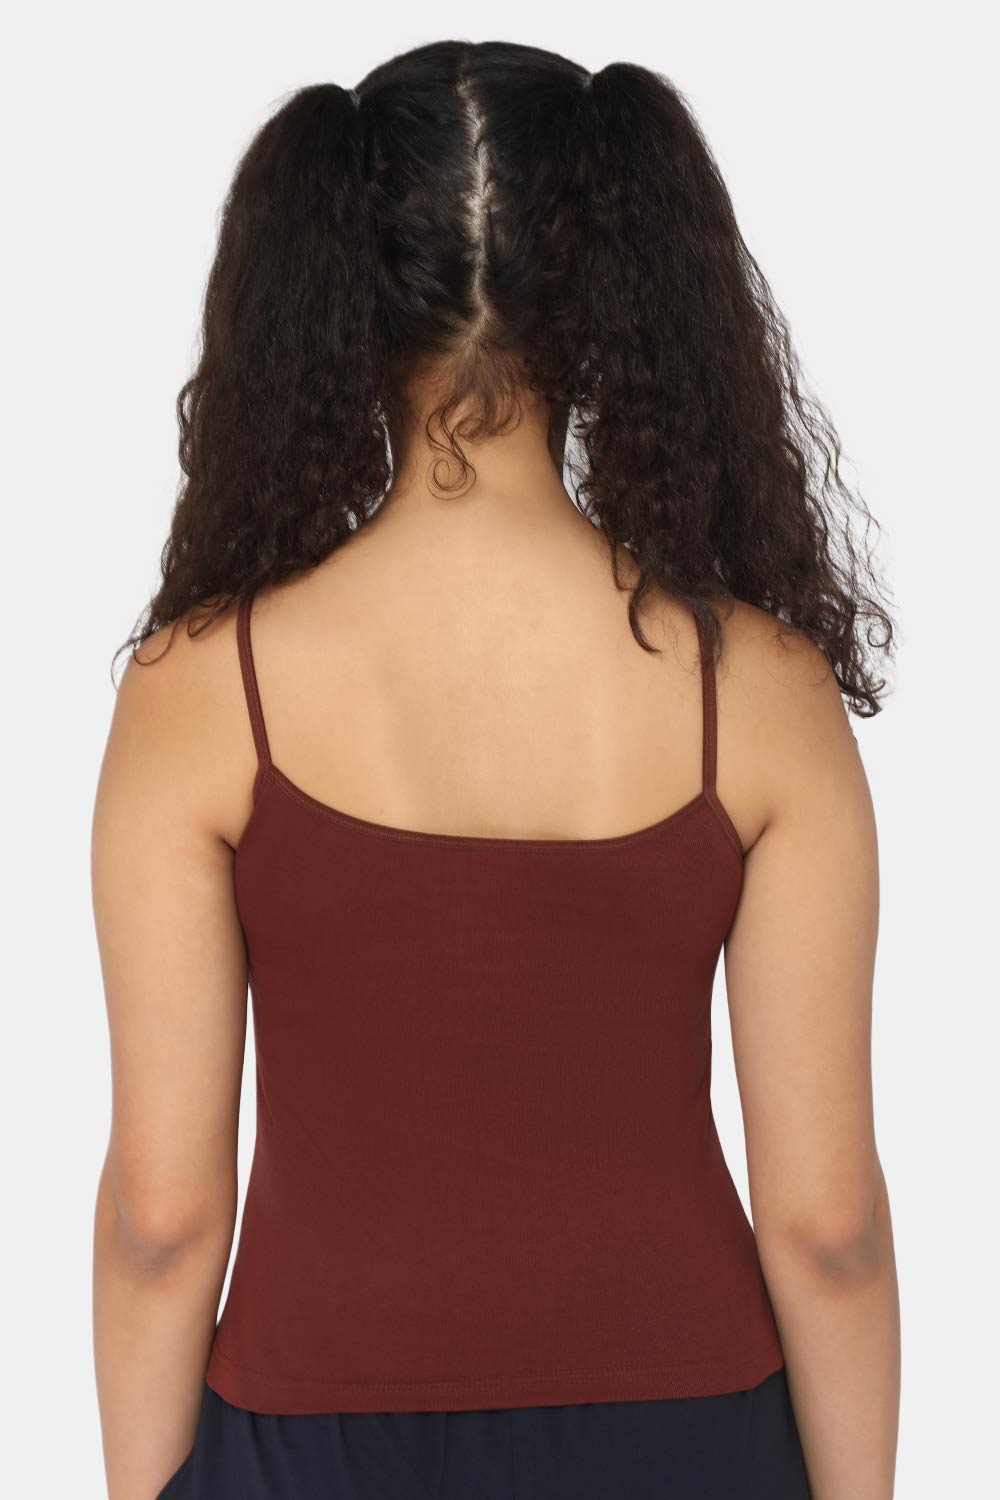 Intimacy Camisole-Slip Special Combo Pack - In02 - Pack of 3 - C57